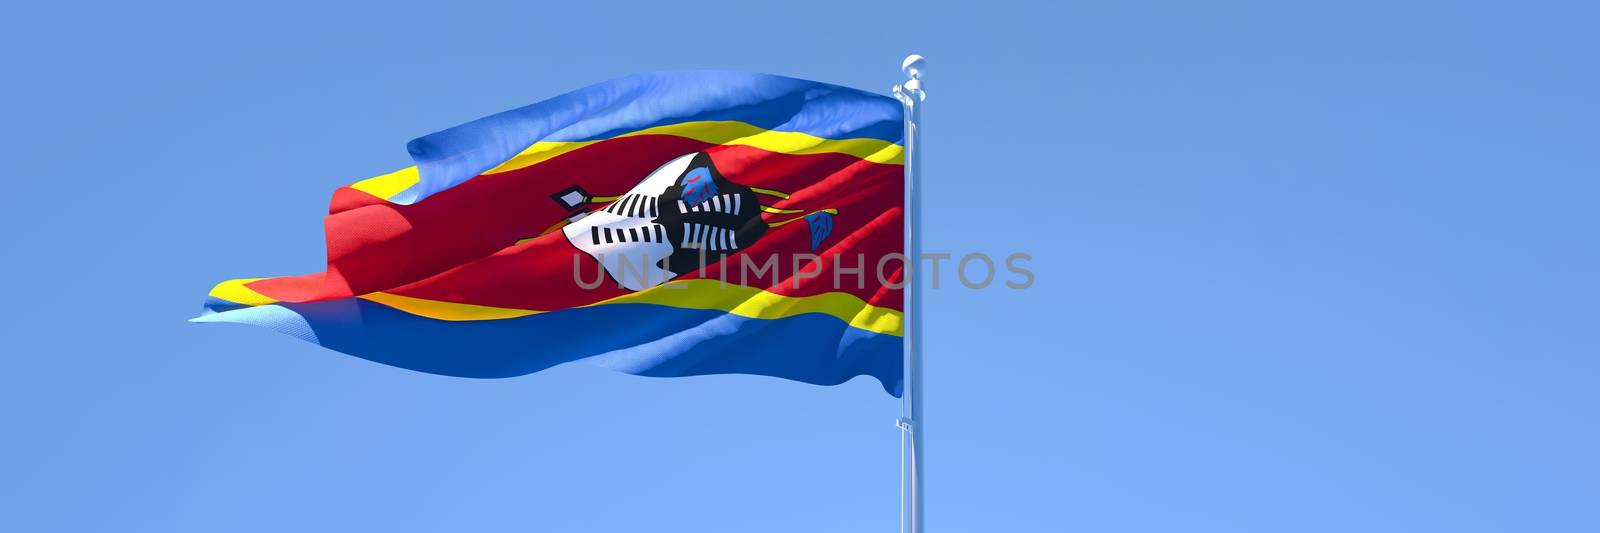 3D rendering of the national flag of Swaziland waving in the wind against a blue sky